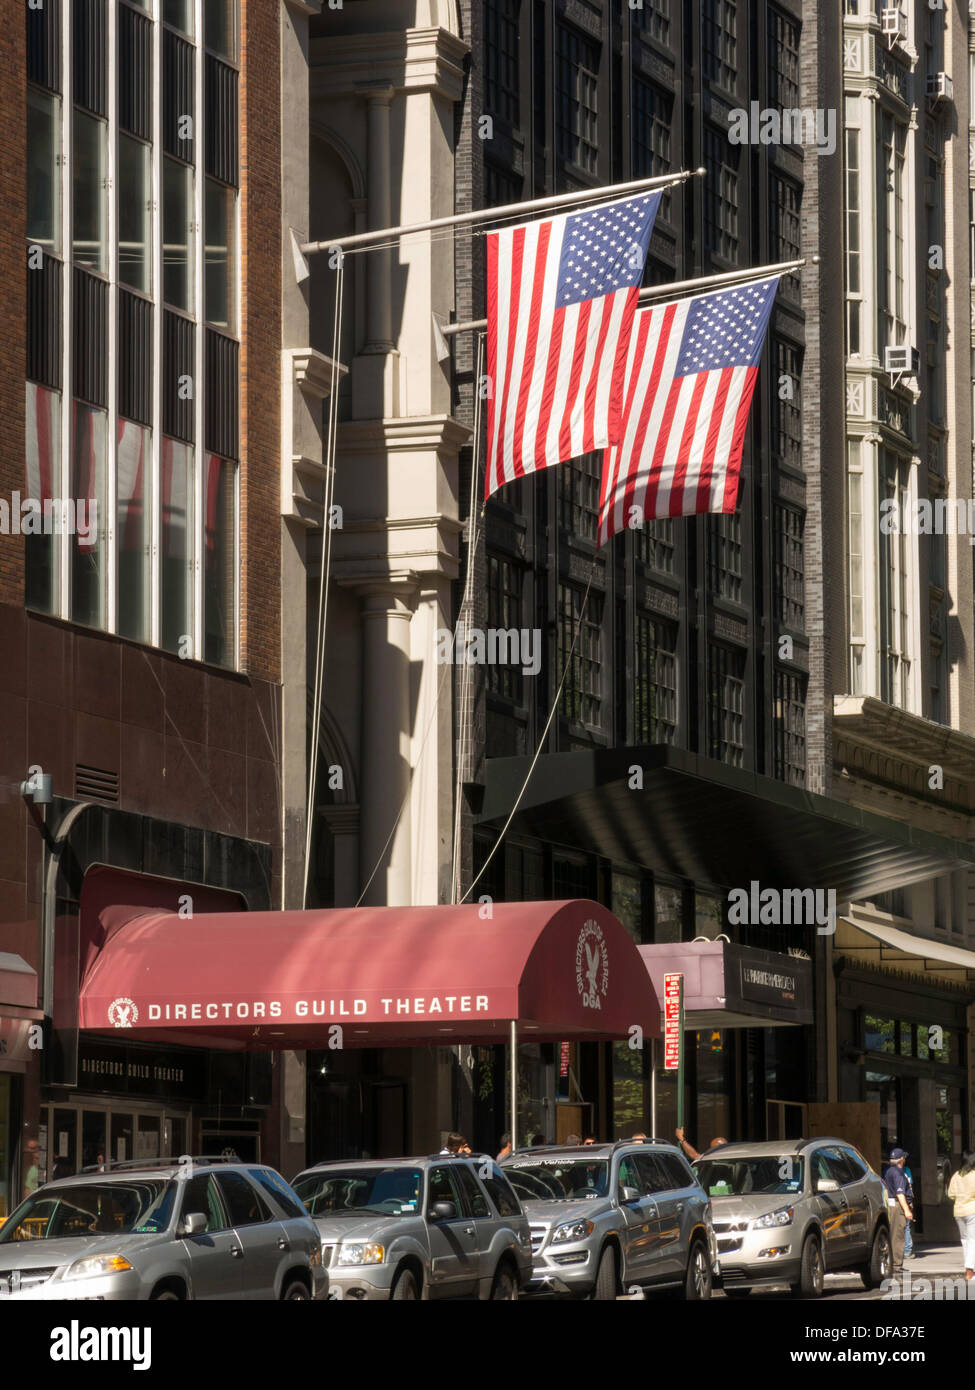 Directors Guild Theater on West 57th Street, NYC Stock Photo